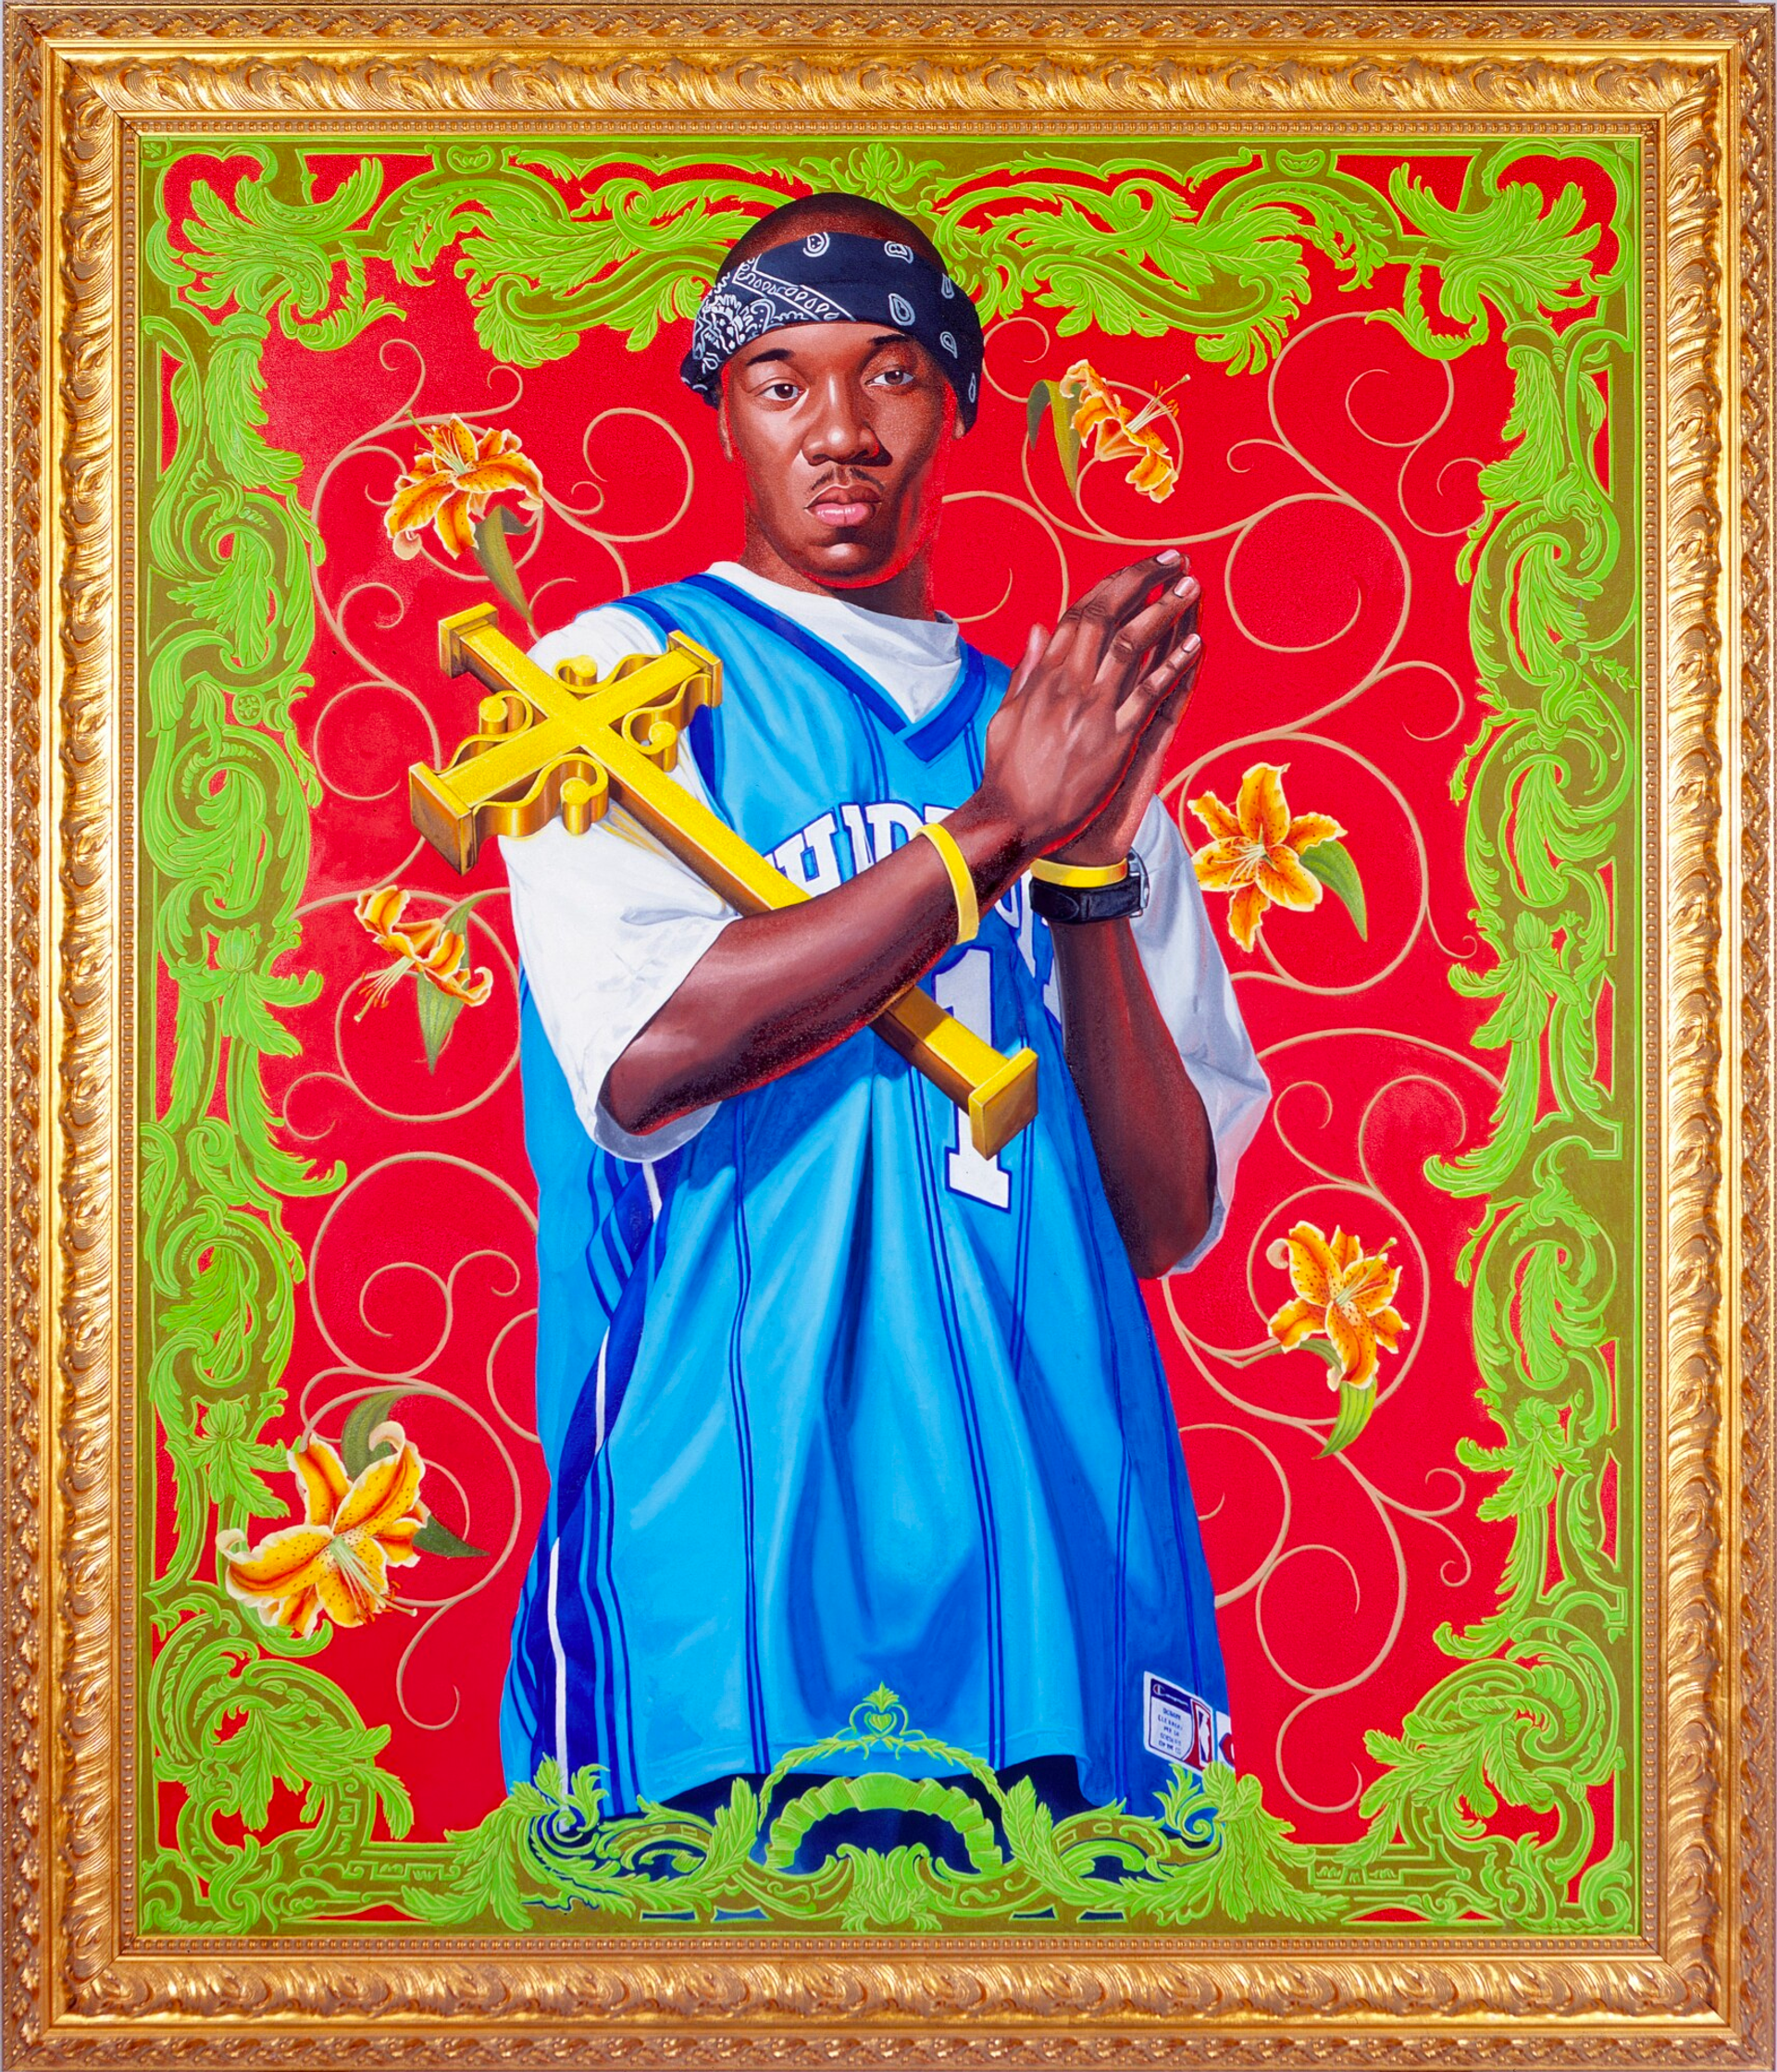 In the center of the portrait, a young black man captures attention with his street-style ensemble. He wears a white t-shirt beneath a blue basketball sports jersey, and a blue paisley bandana adorns his head. His gaze locks onto the viewer as he assumes a prayer pose, with his hands clasped in front of him. Against a vibrant red backdrop, adorned with yellow flowers, the young man stands out. The artwork is further enhanced by intricate and ornate vibrant green elements. The portrait is elegantly framed in gold.